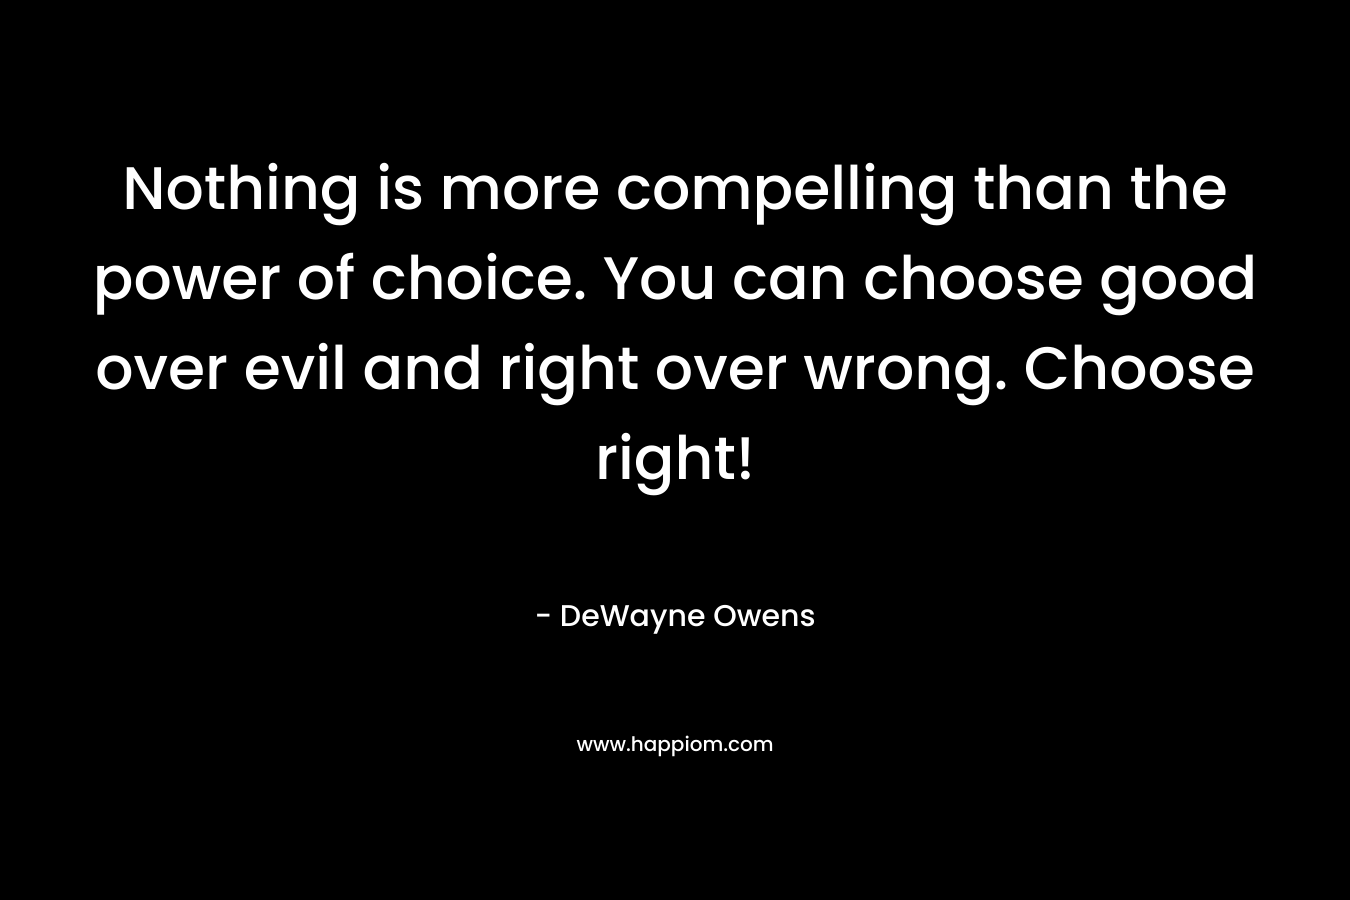 Nothing is more compelling than the power of choice. You can choose good over evil and right over wrong. Choose right!